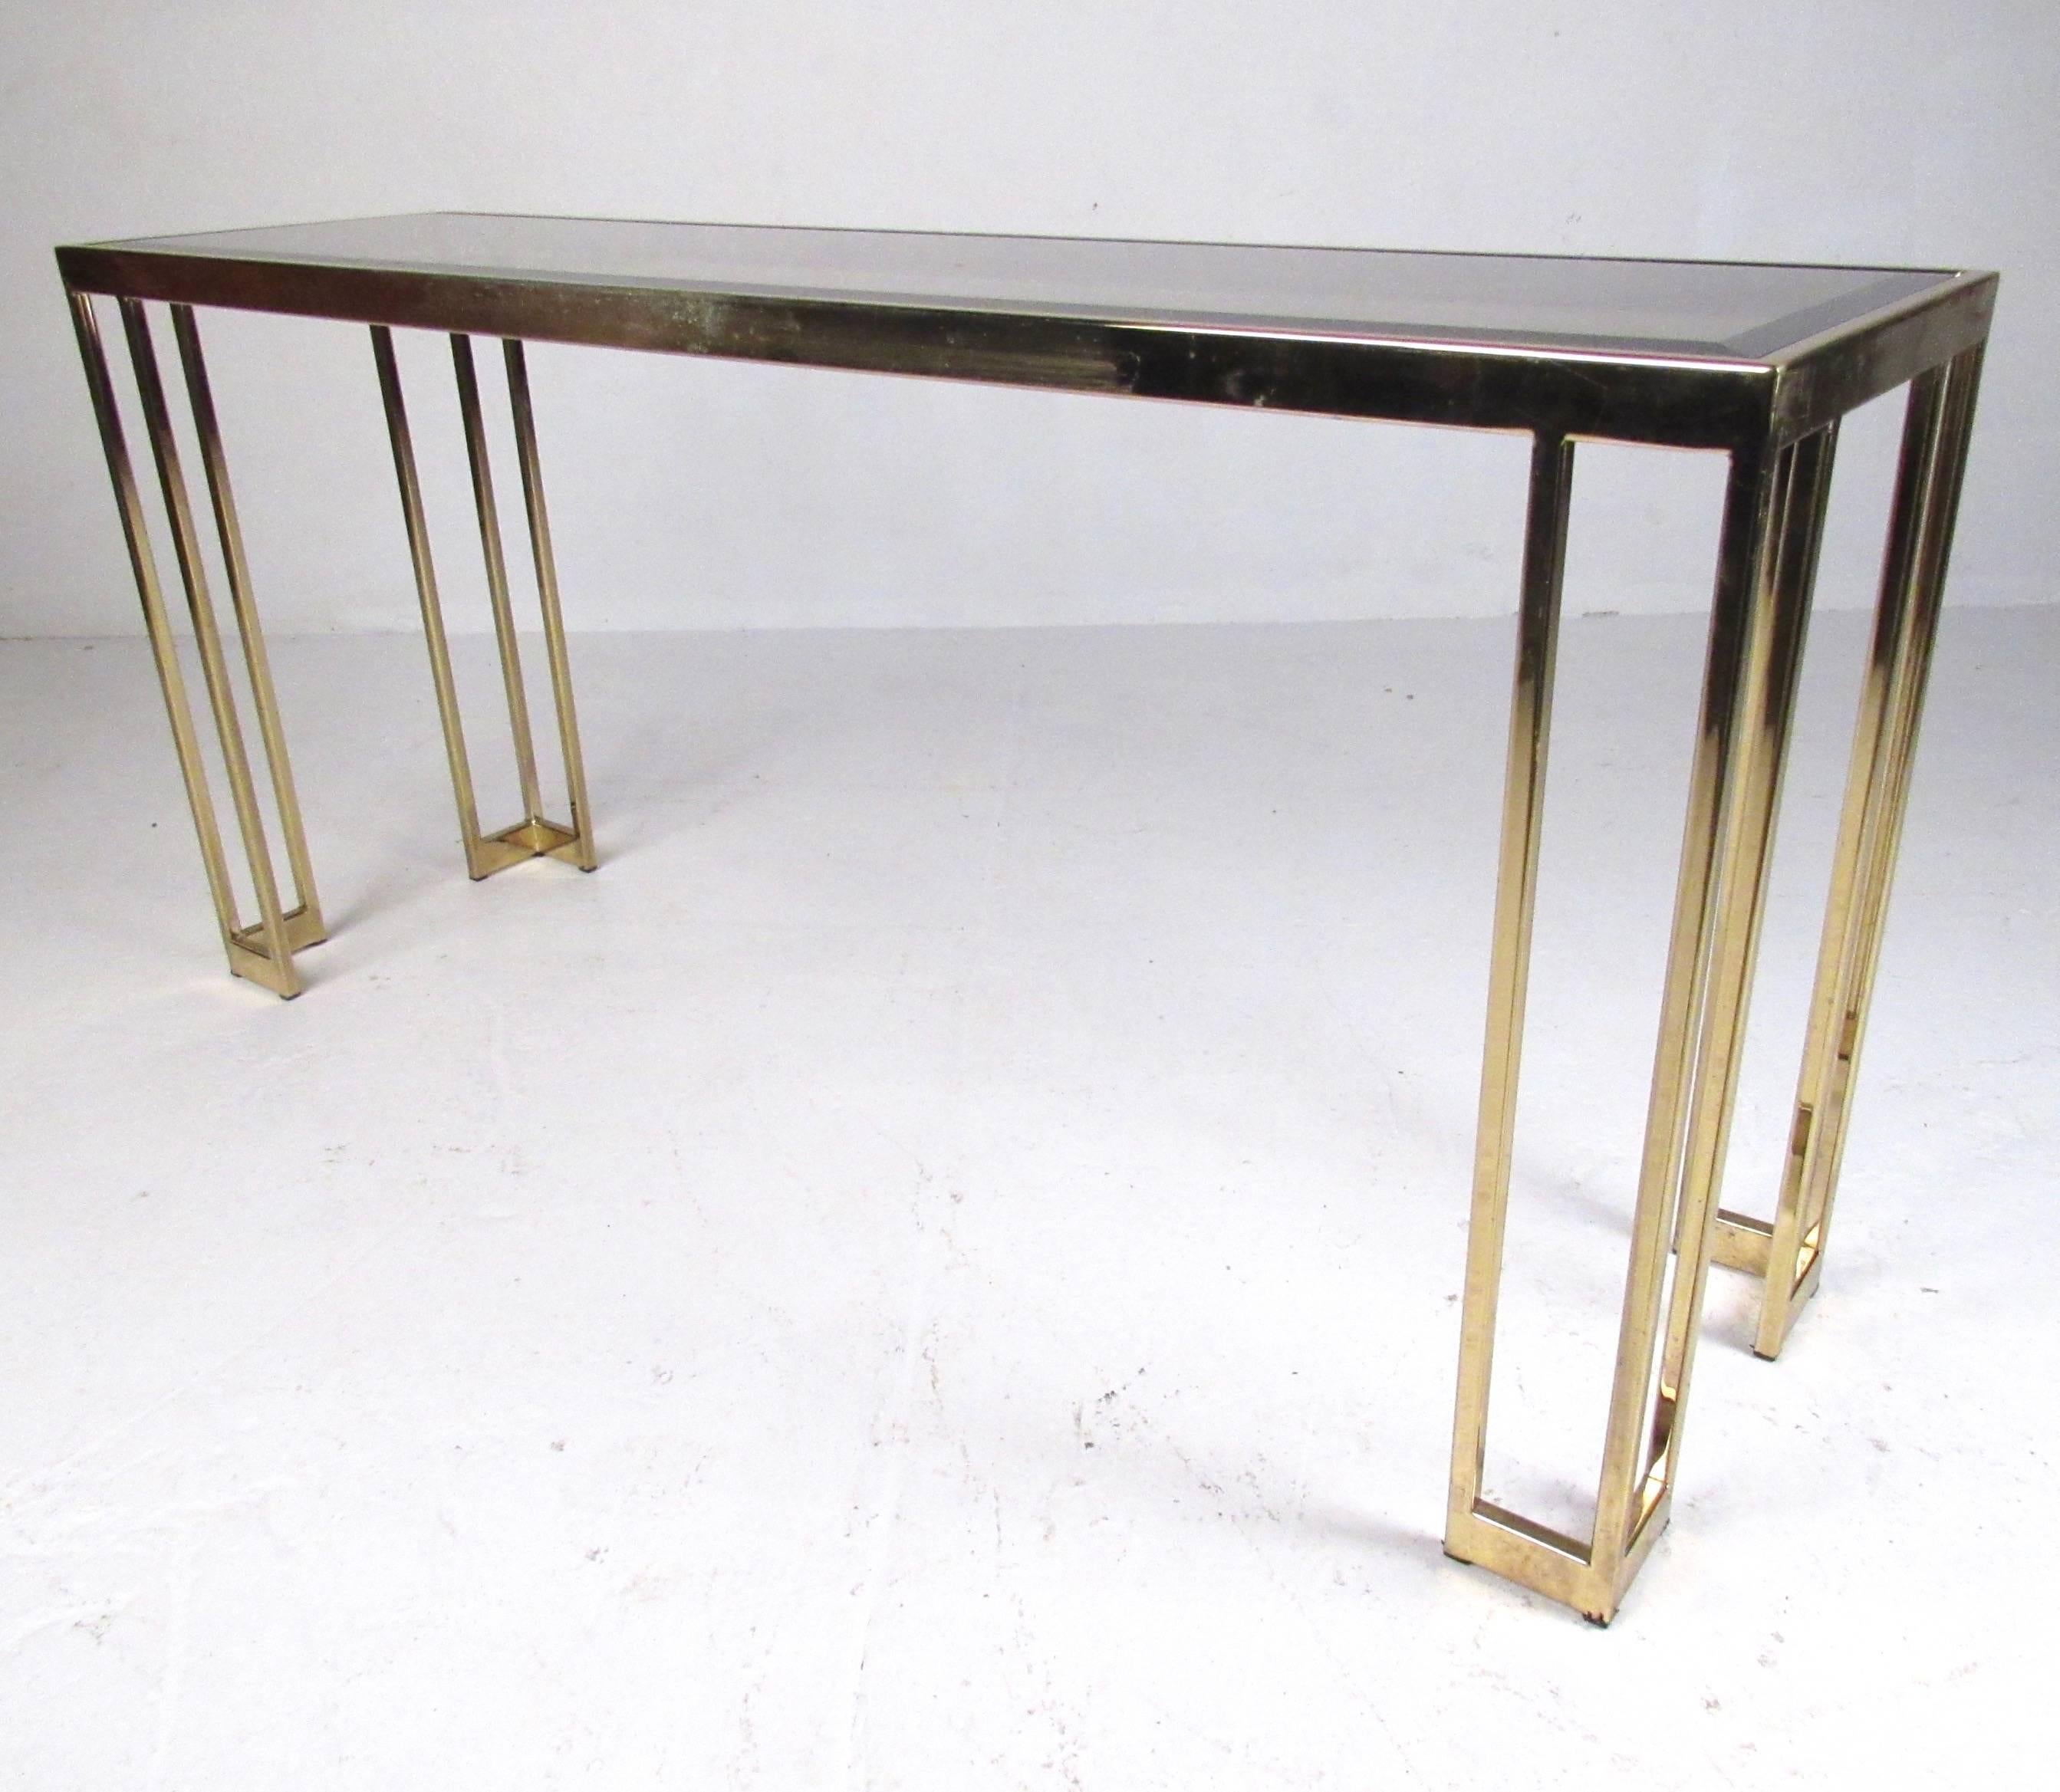 This bevel glass top table features bronze finish frame and shapely midcentury style. Perfect dimensions for use as an entryway console, hall display, or as a sofa table. Please confirm item location (NY or NJ).